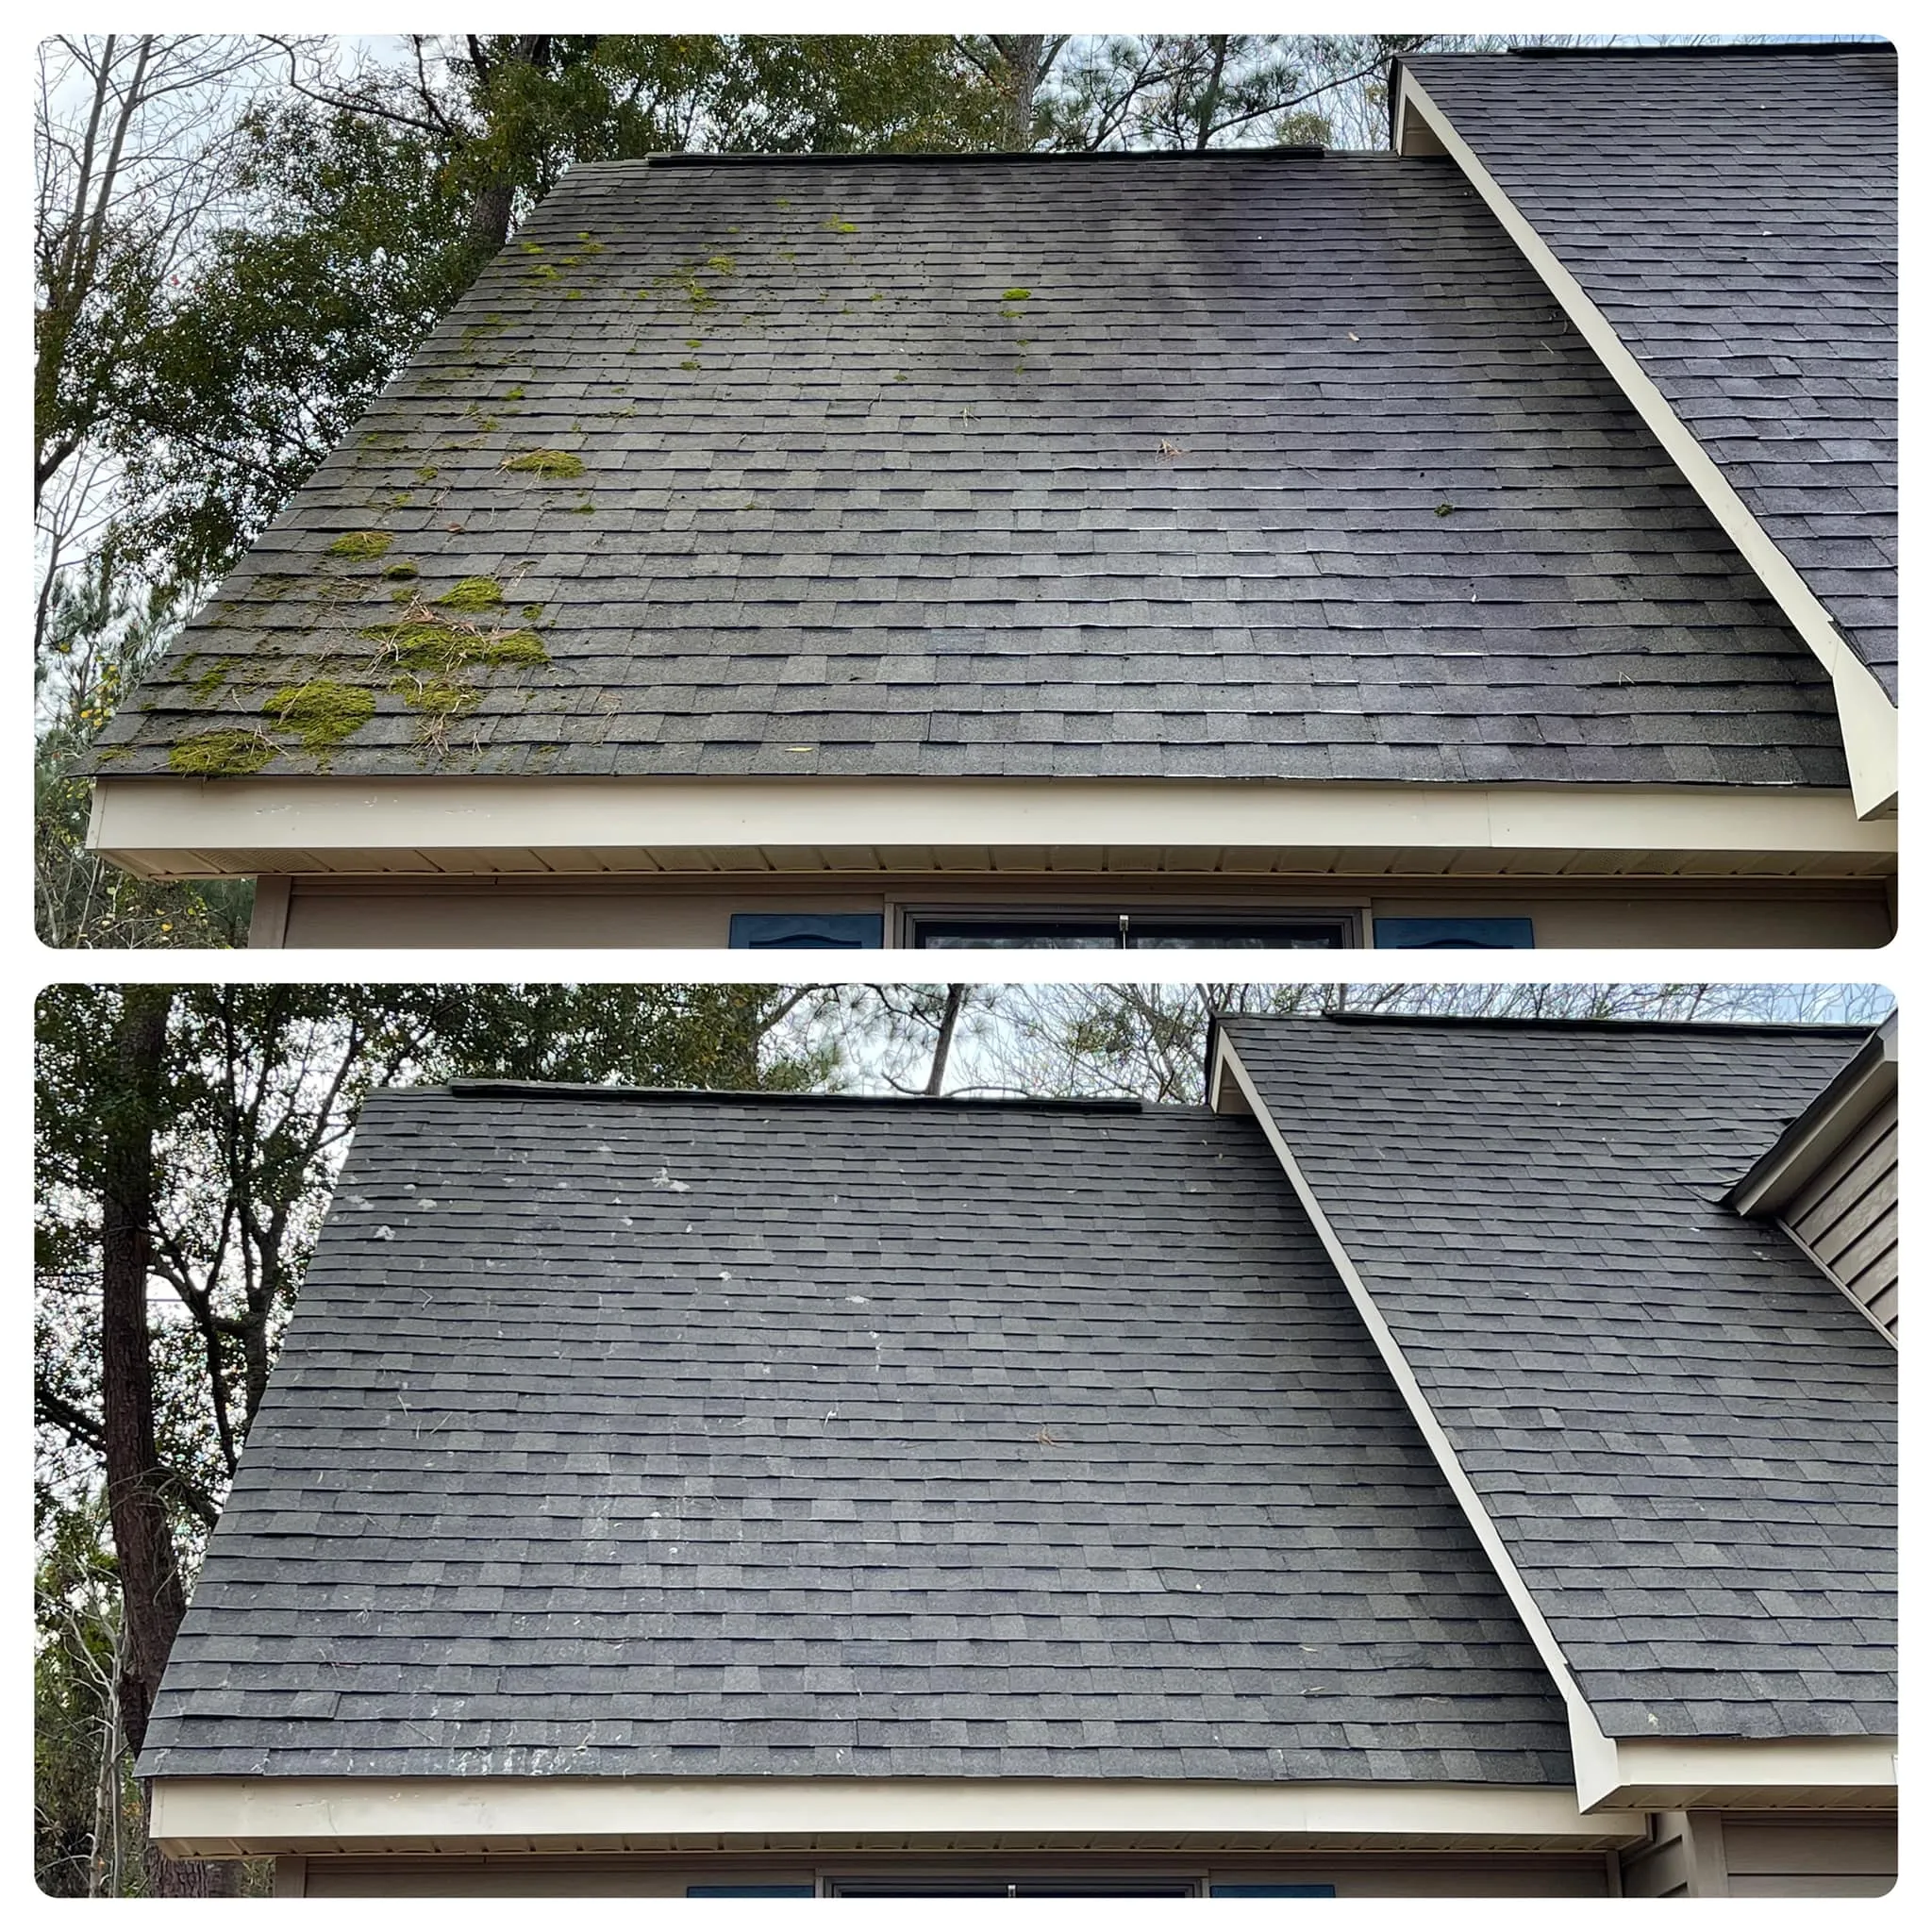 Our Roof Cleaning service is hardworking and reliable. We offer a reasonable price and attention to detail. Our team will work diligently to clean your roof and make it look like new again. Contact us today to schedule a free consultation! for Sabre's Edge Pressure Washing in Greenville, NC